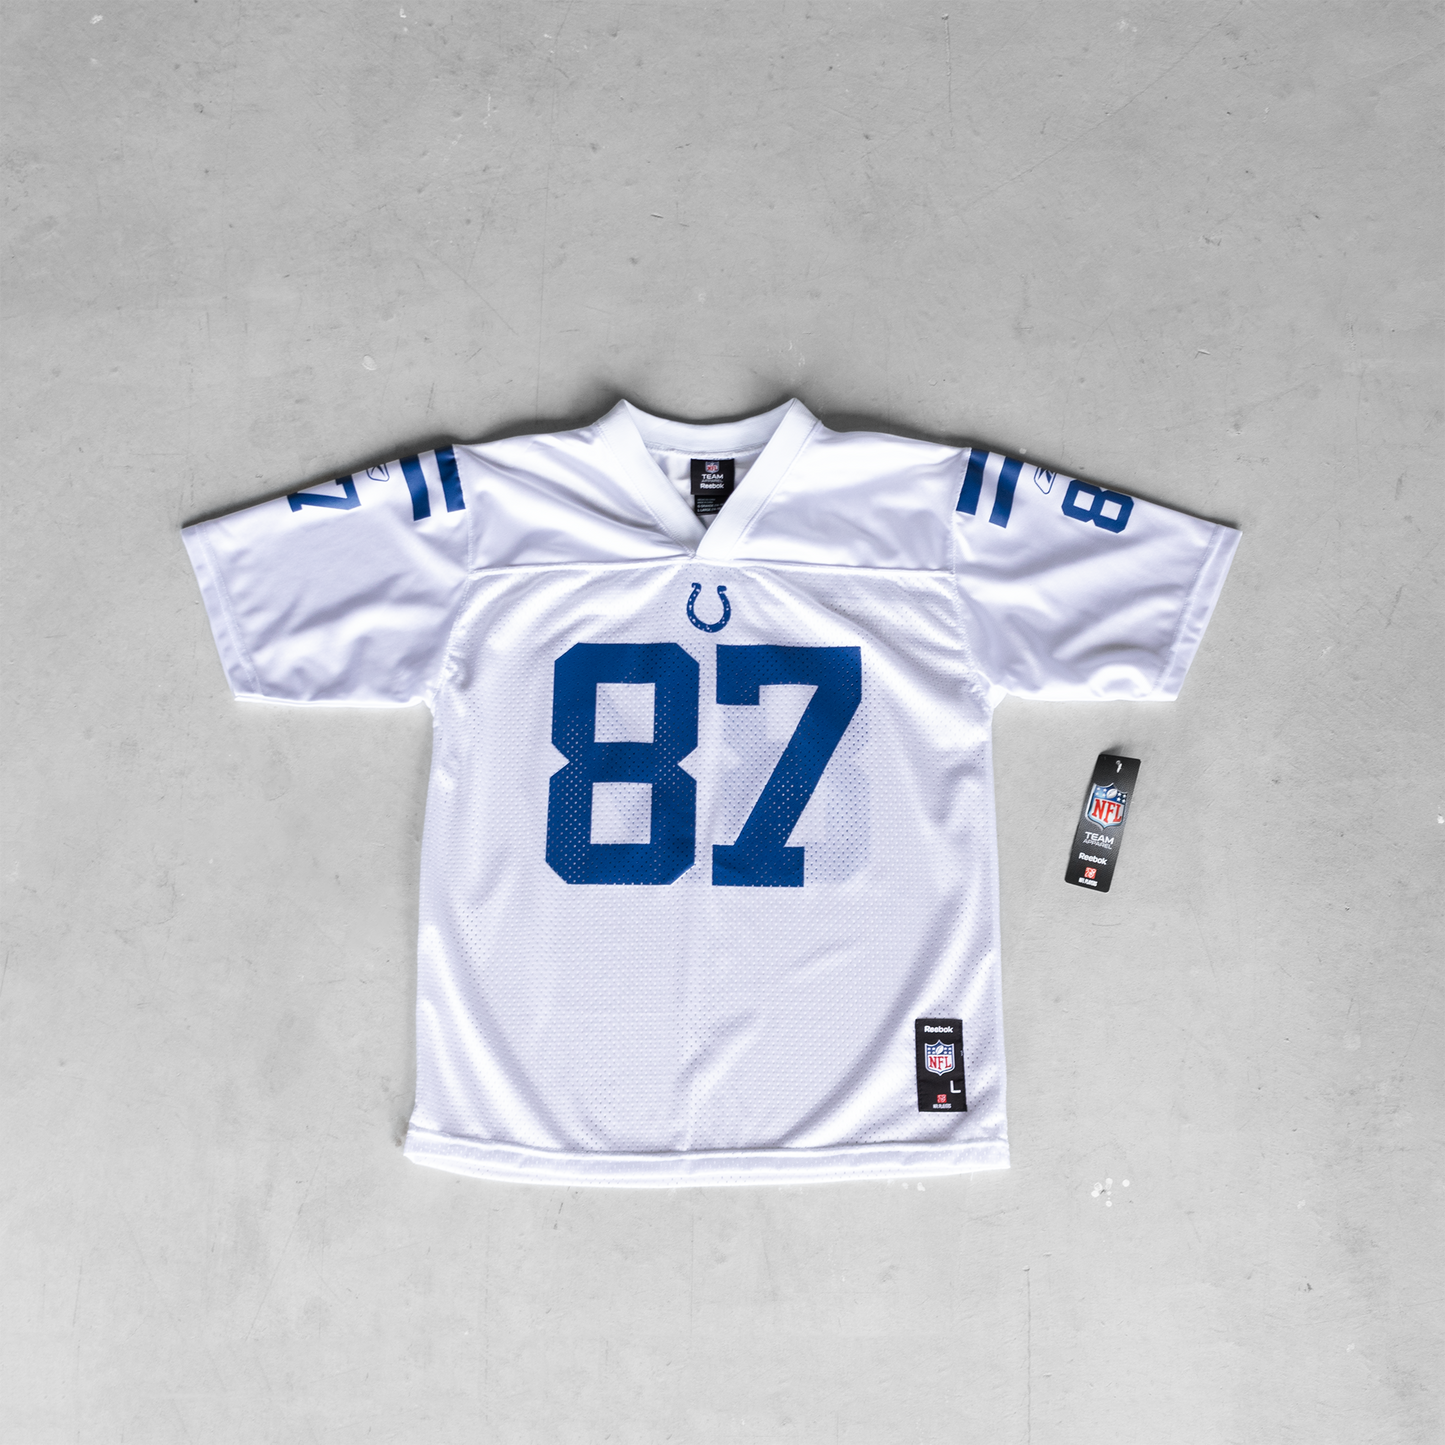 Vintage NFL Indianapolis Colts Reggie Wayne #87 Youth Football Jersey (L)